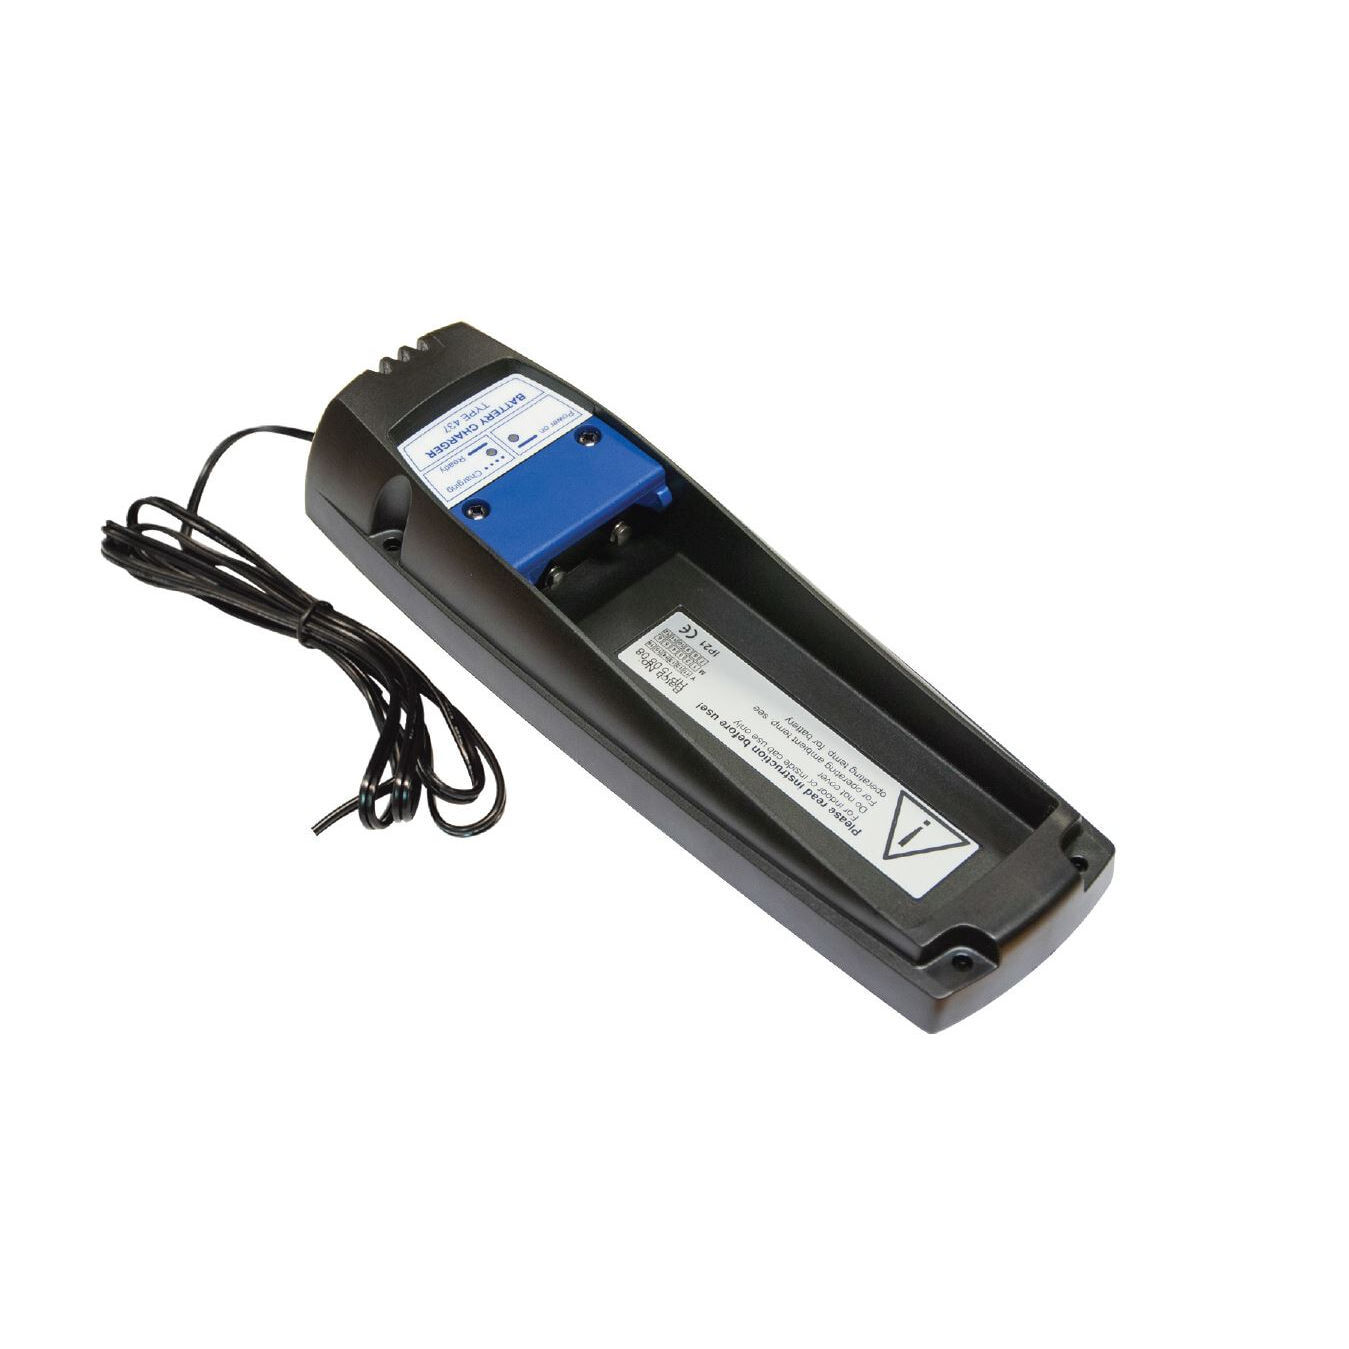 Scanreco Battery Charger 437